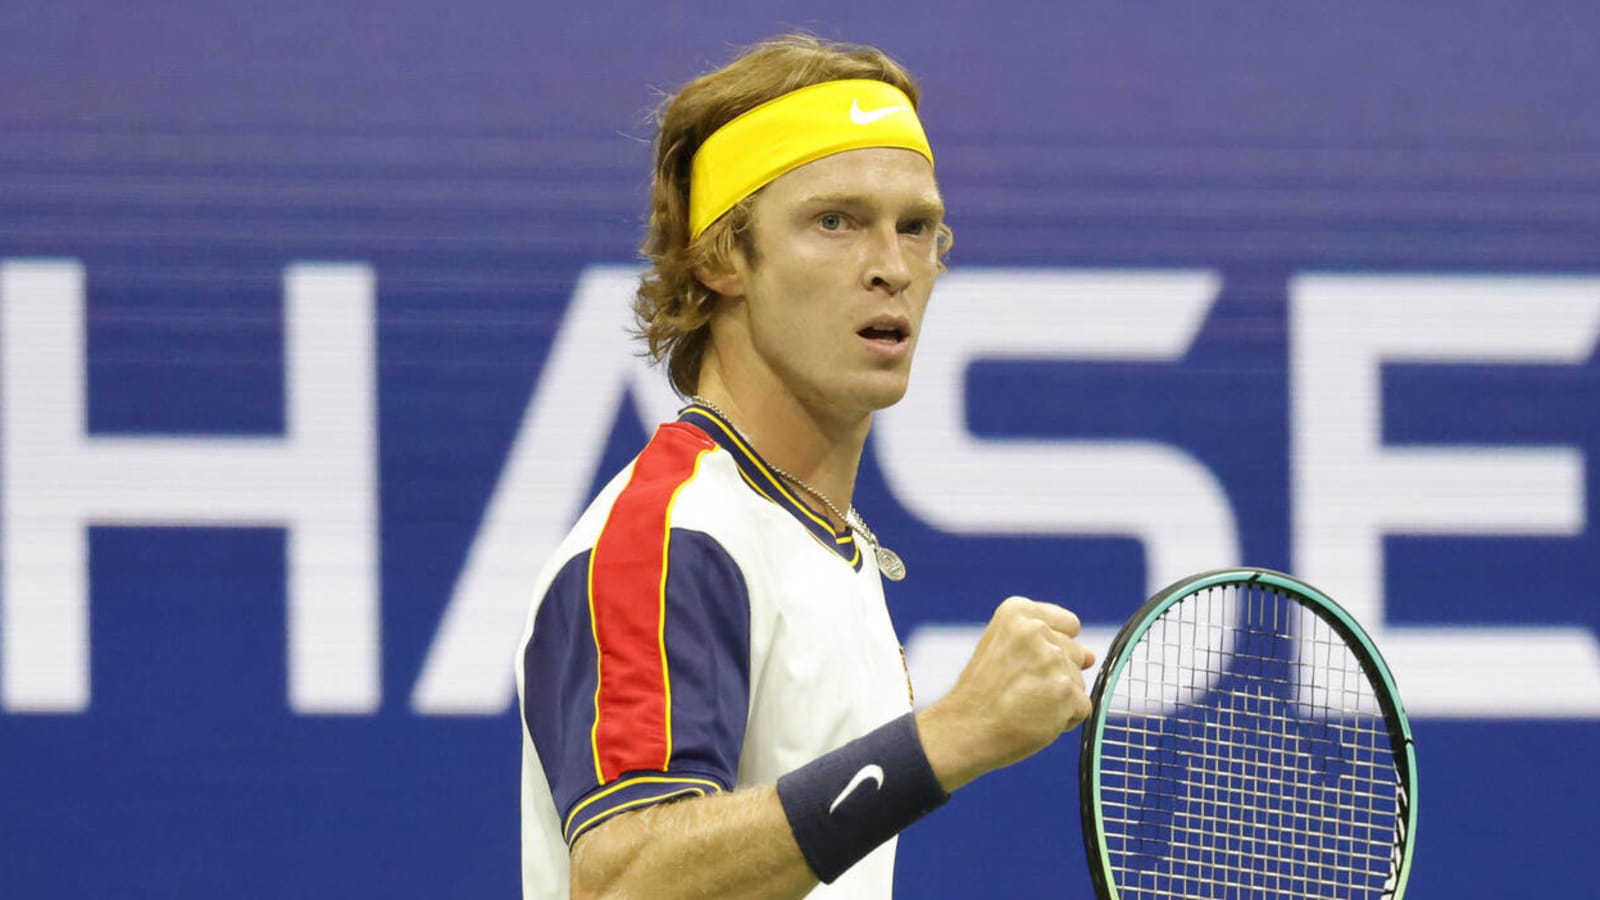 Andrey Rublev writes message about war on TV camera